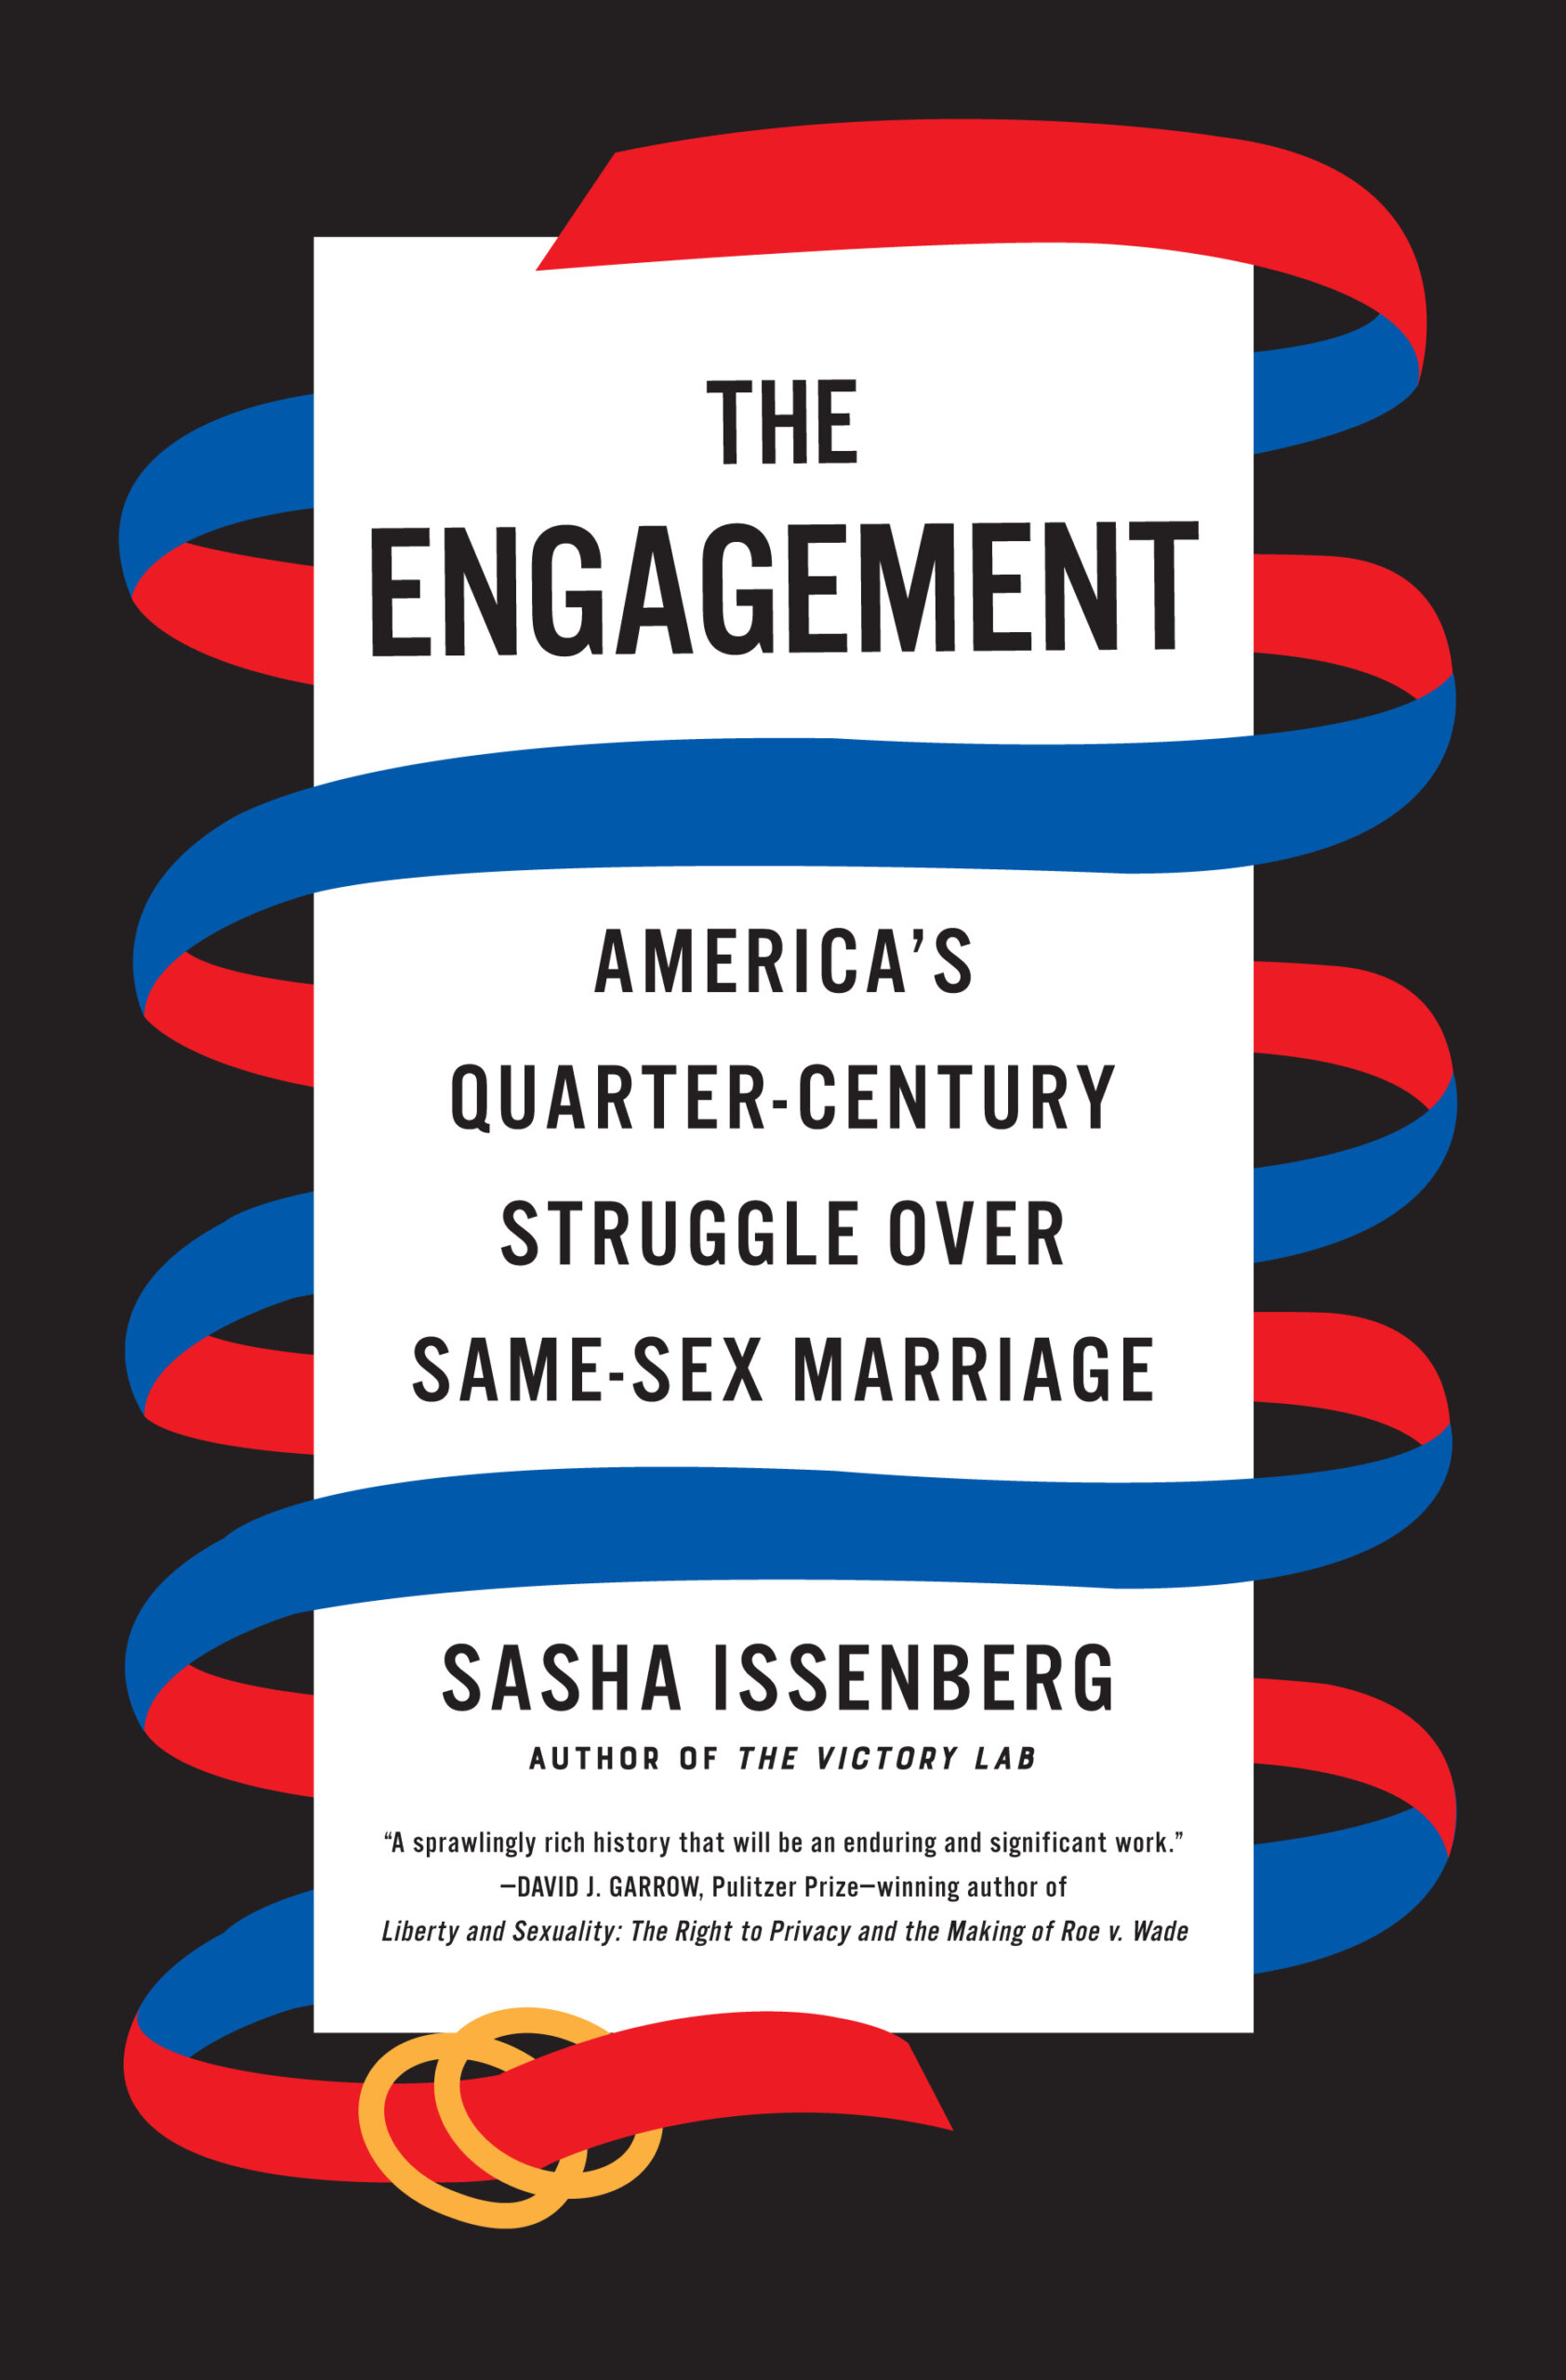 Sasha Issenberg’s The Engagement, which explores the legalization of gay marriage in the U.S.